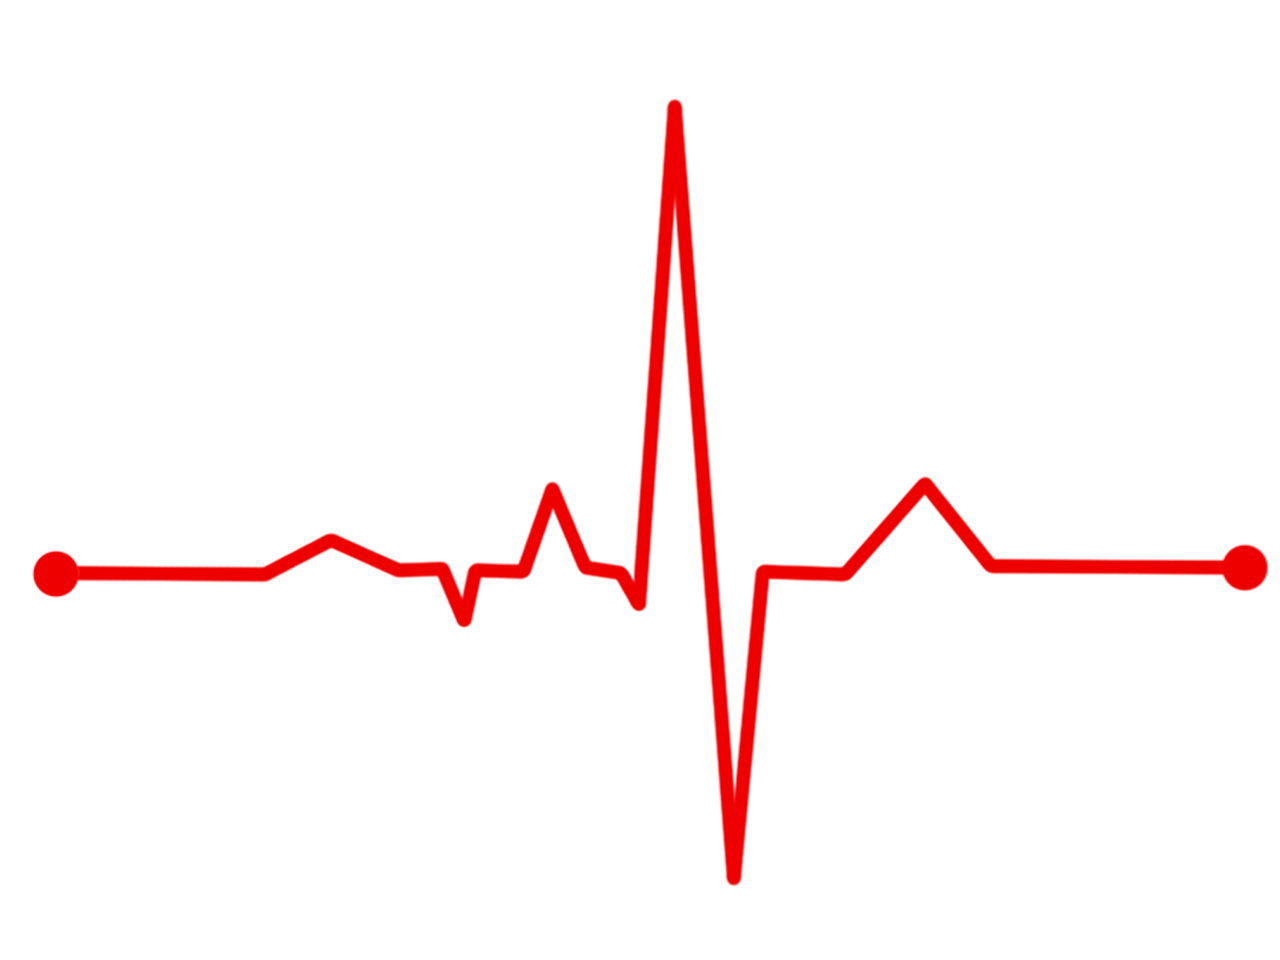 Heart Rate Bpm Ecg Ekg png image file has been added to the Heart Rate cate...